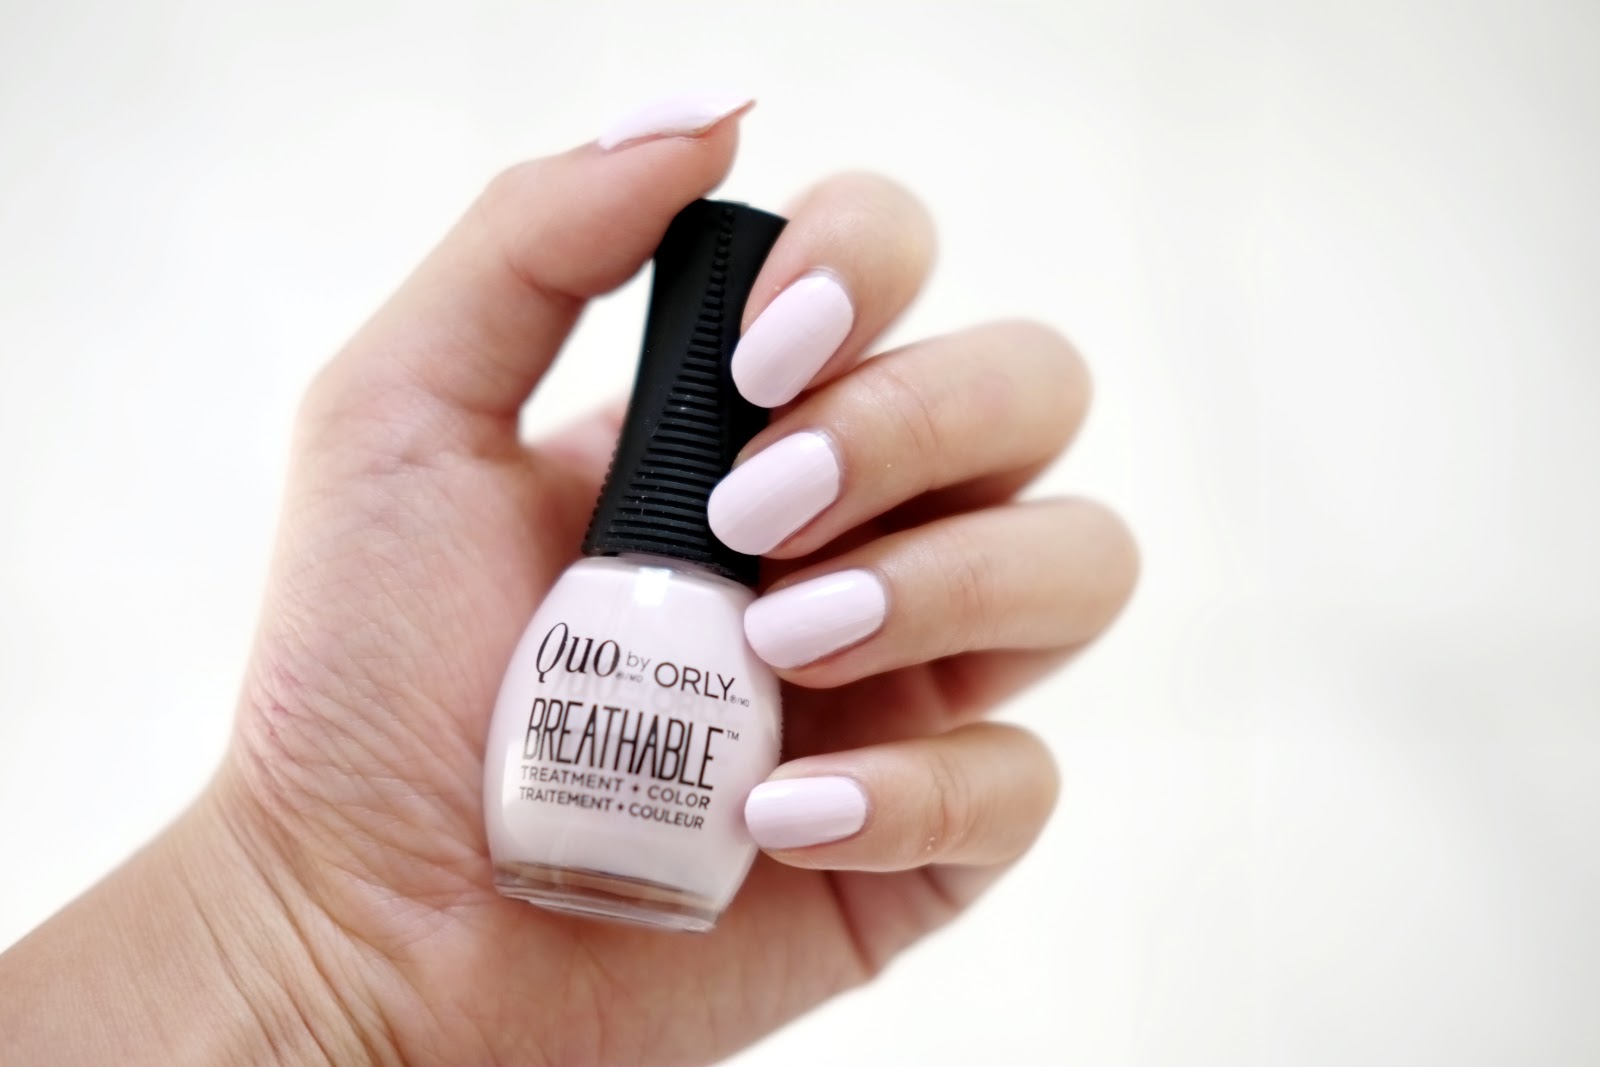 9. Orly Breathable Treatment + Color Sheer Nail Polish - wide 4